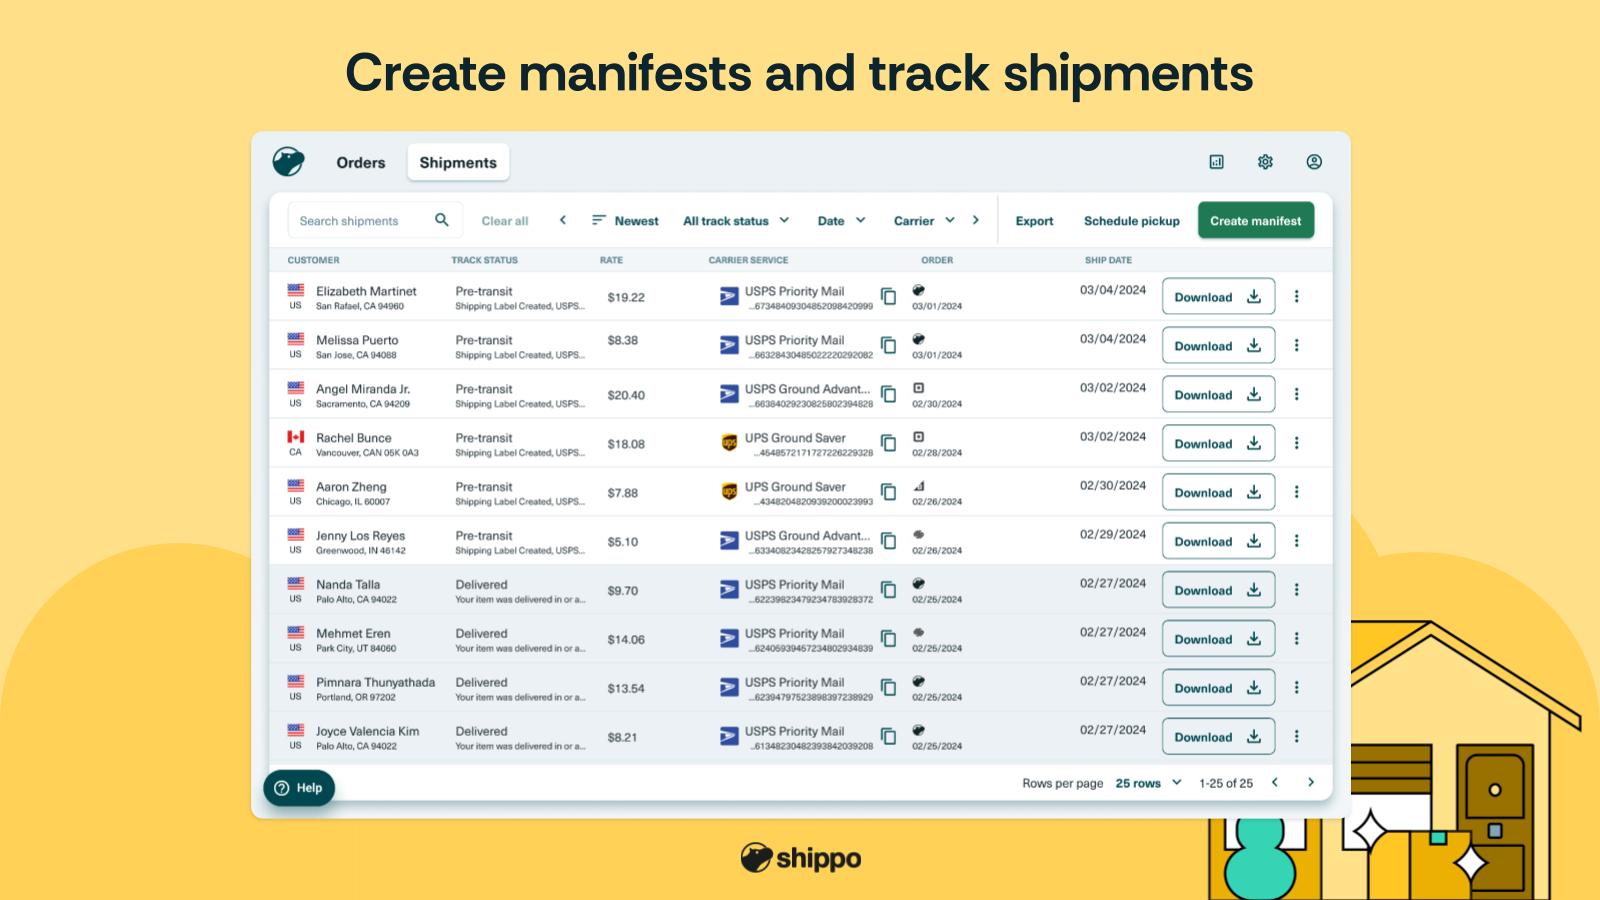 Create manifests and track shipments